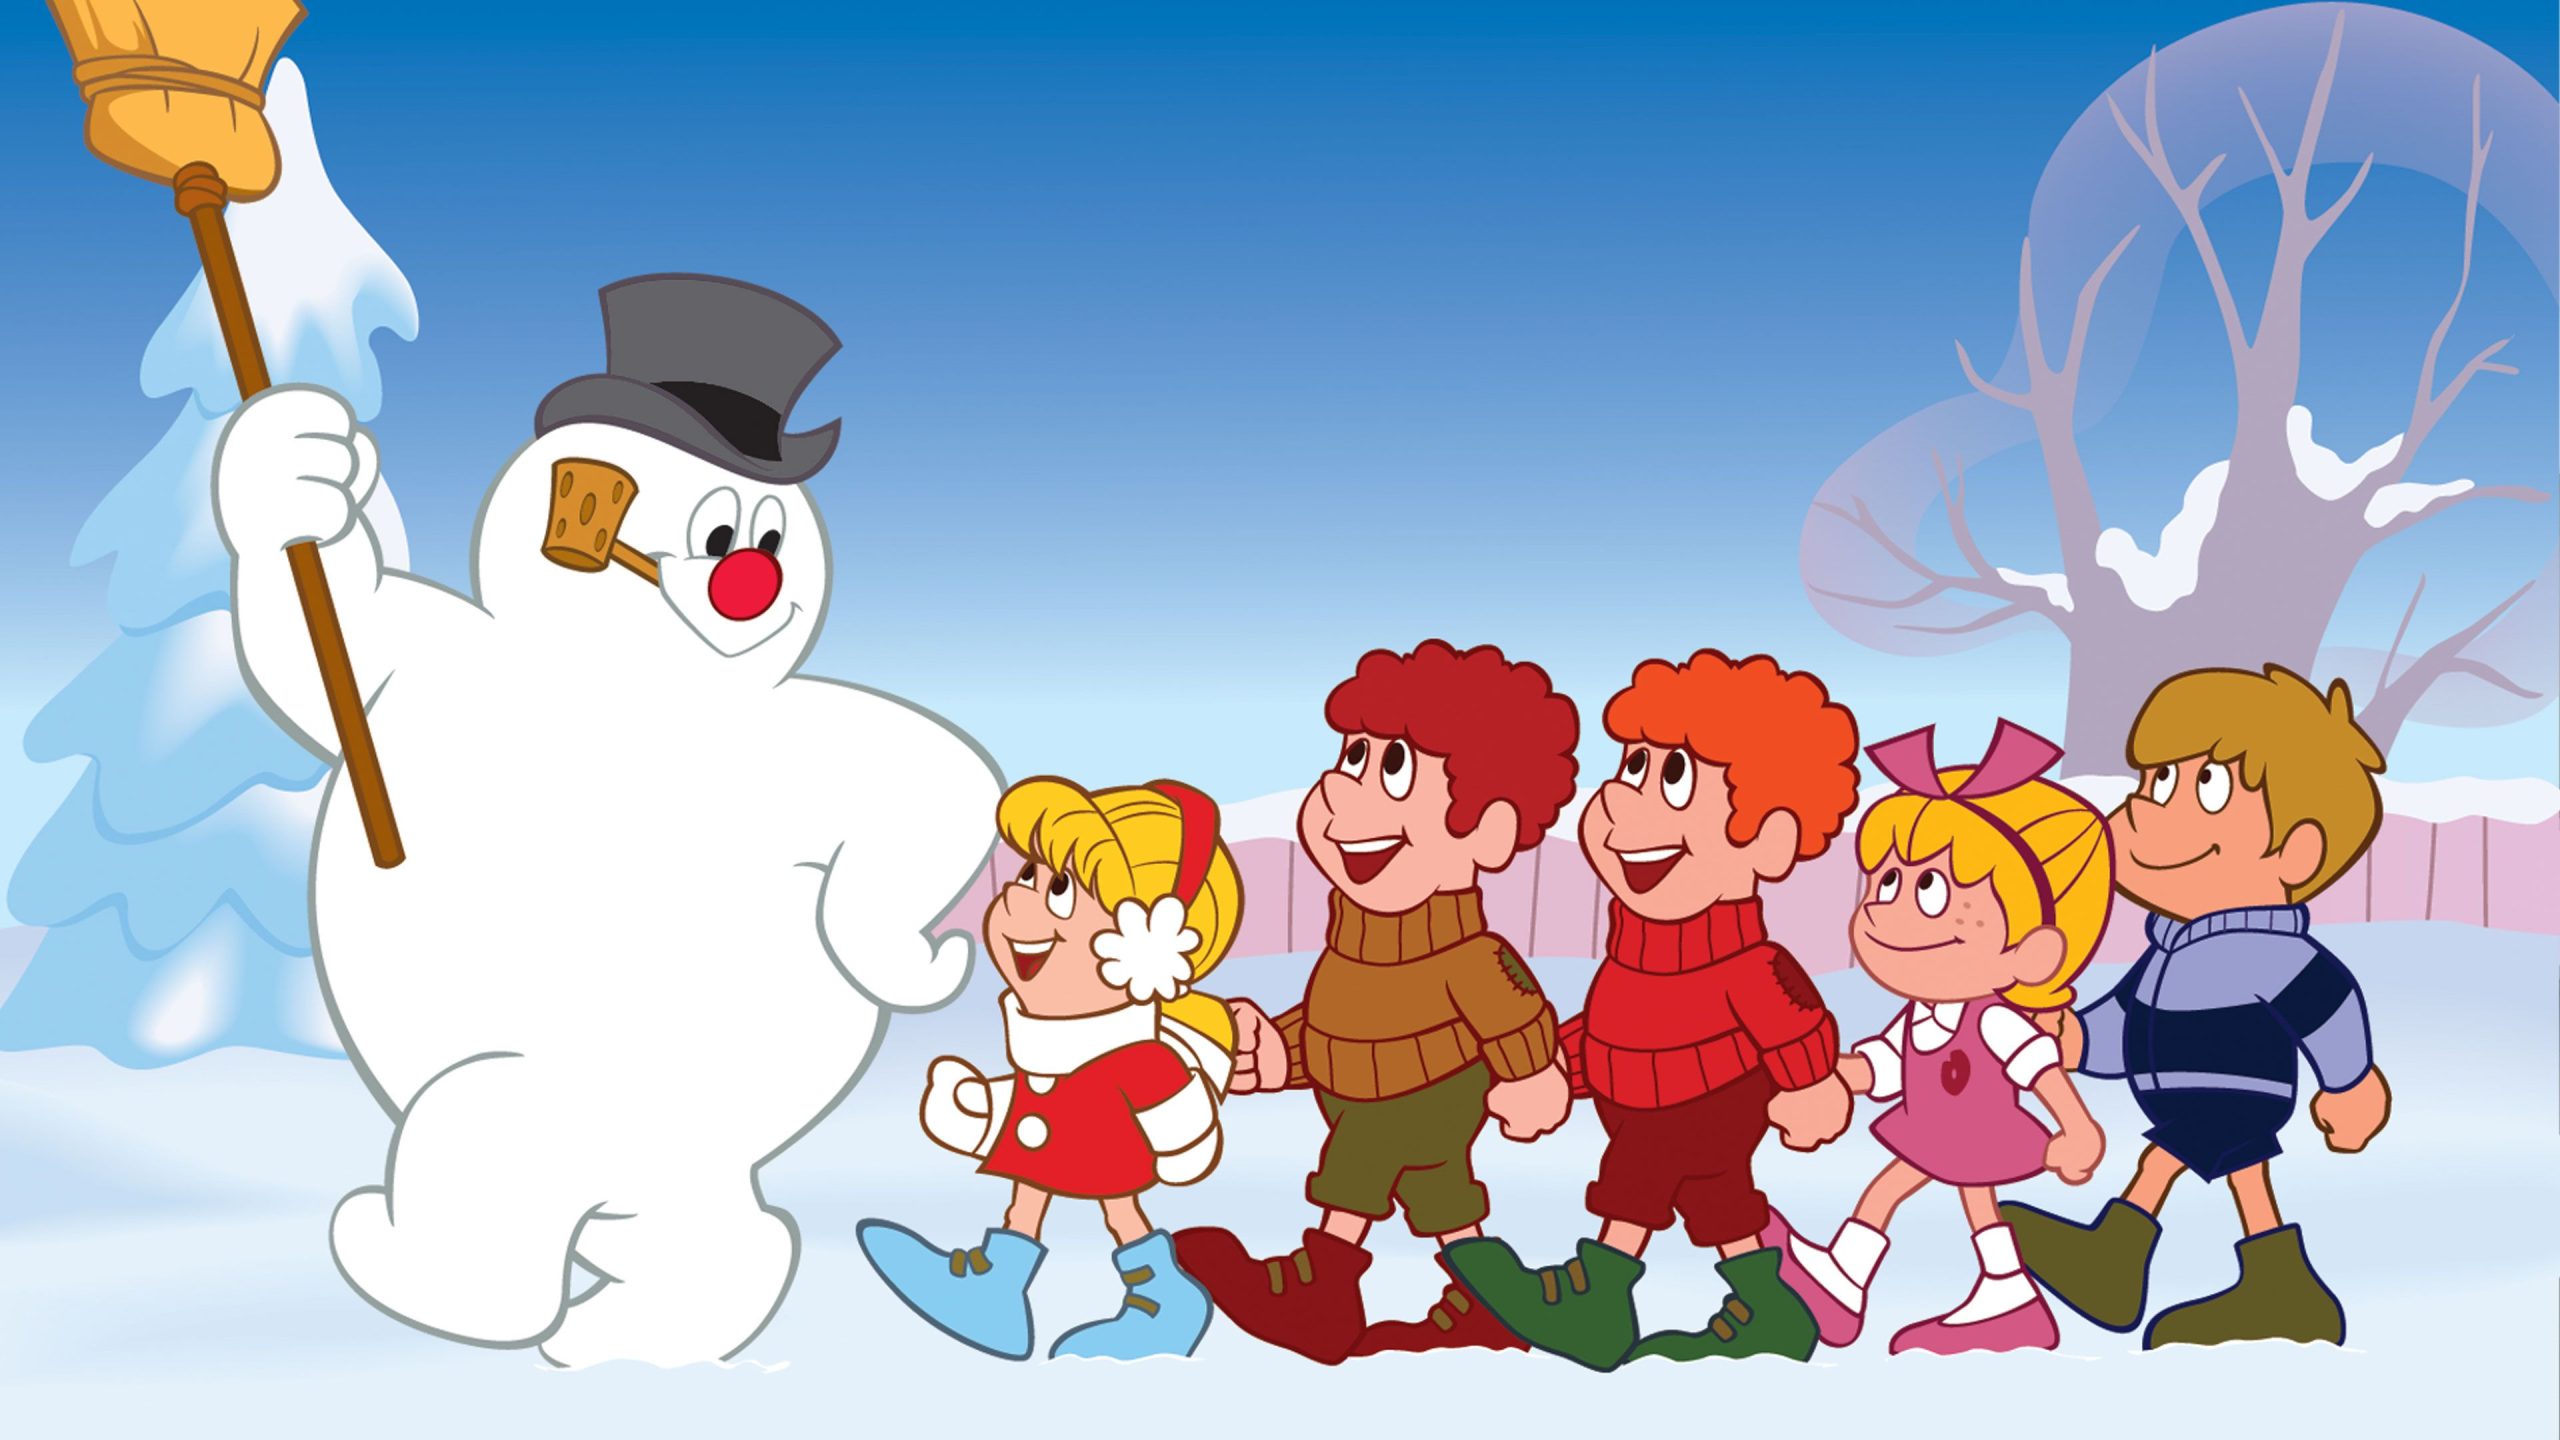 Image from Frosty the Snowman cartoon film showing Frosty leading a line of children.